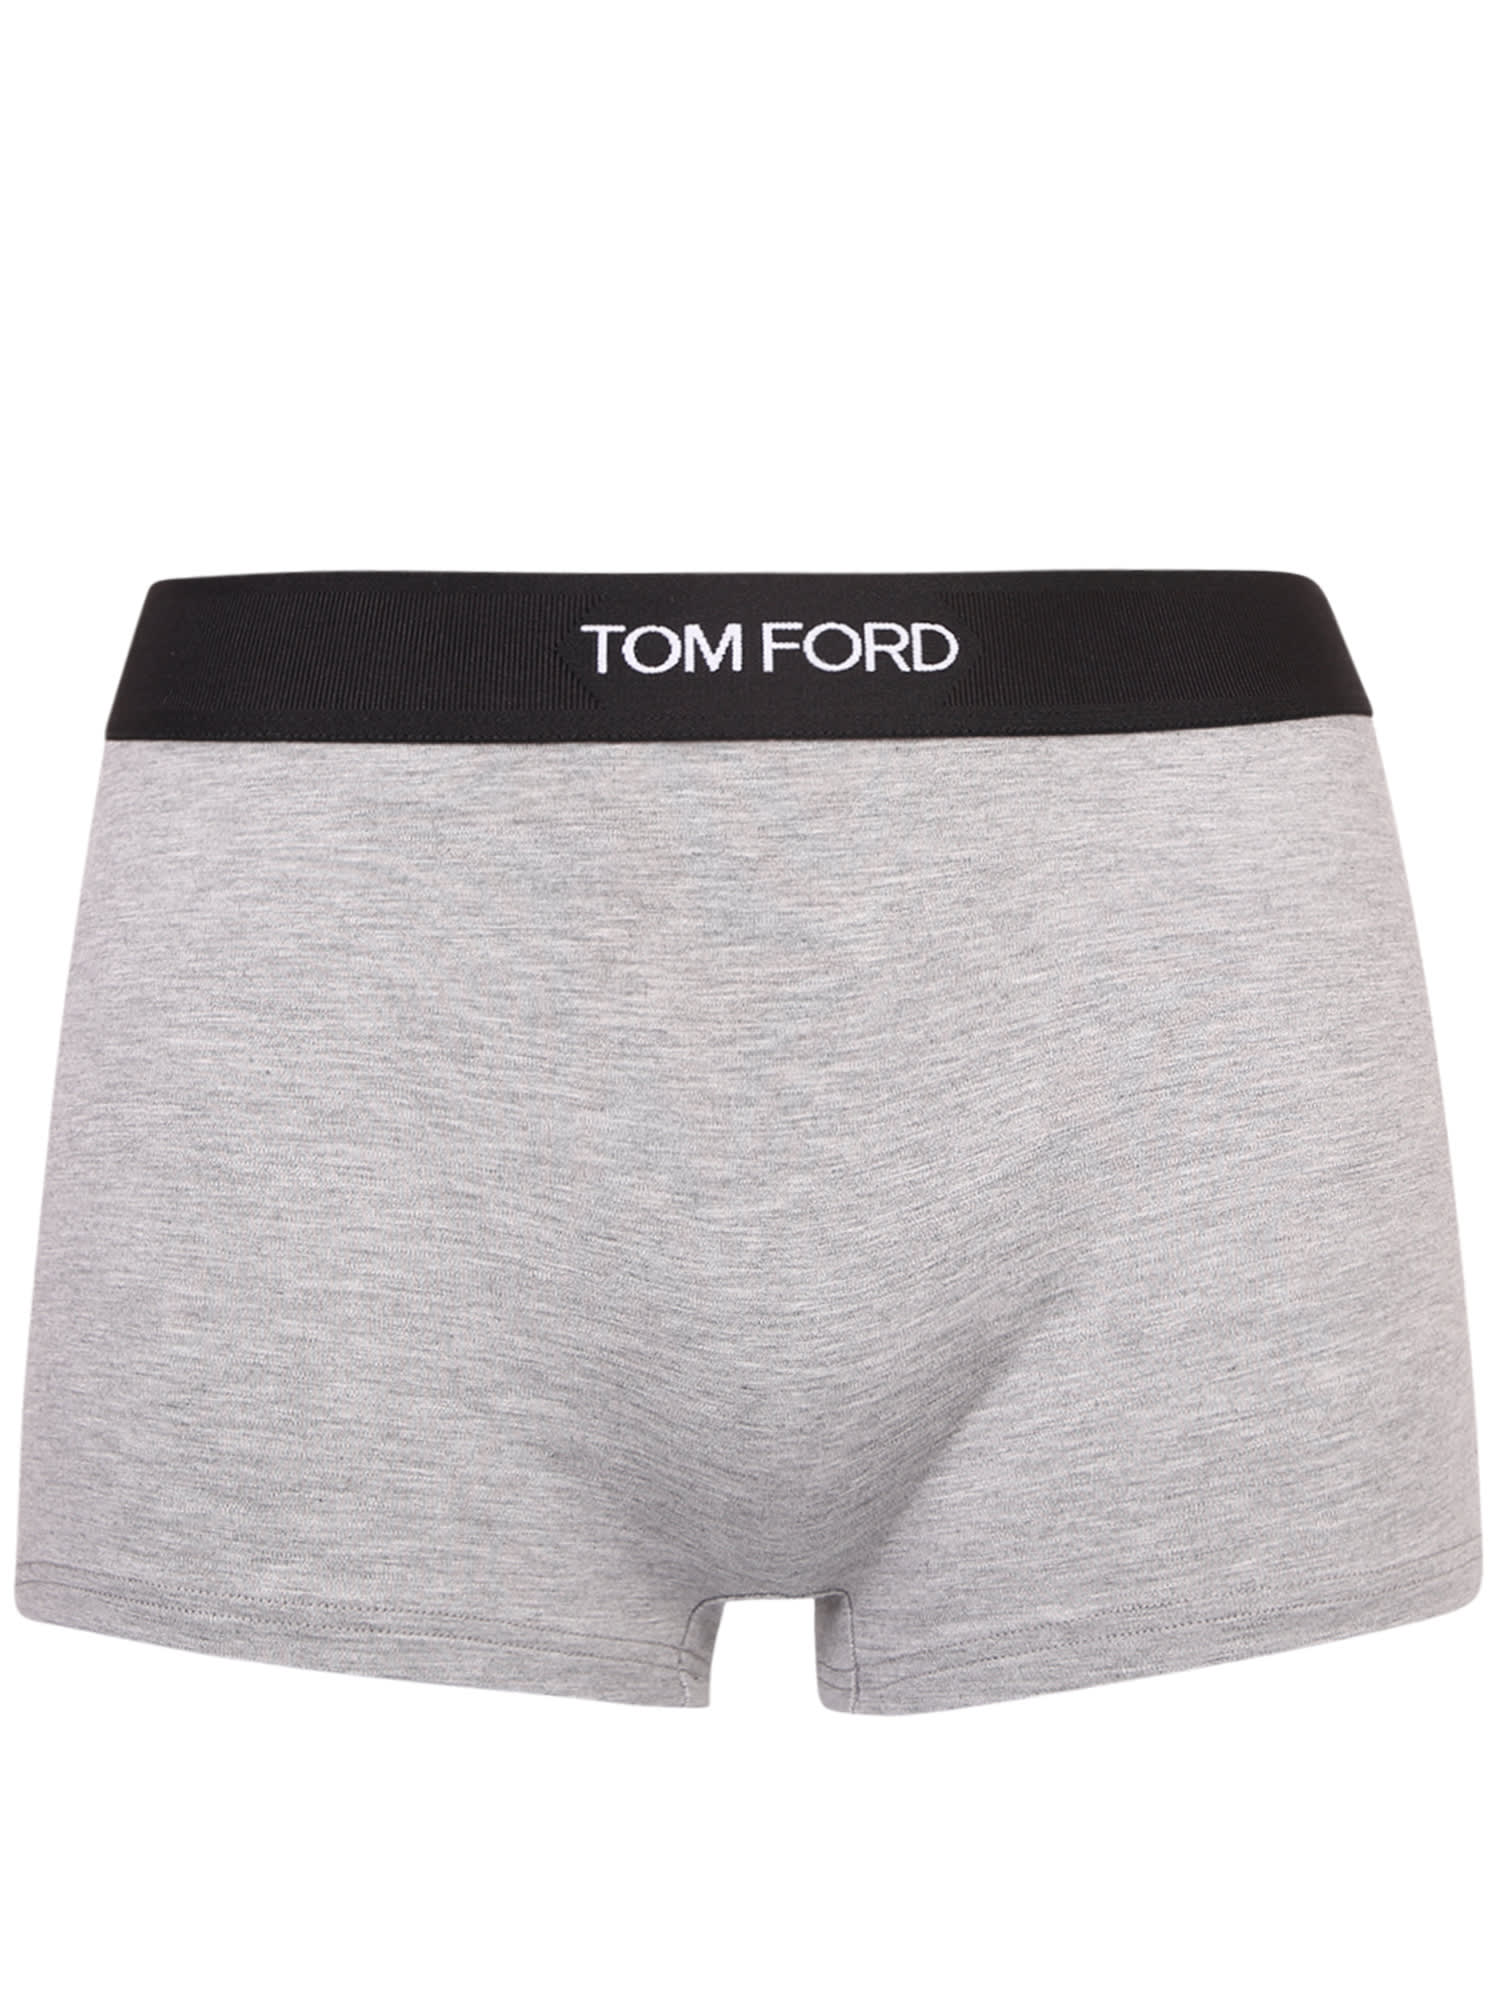 Tom Ford Logo Knickers Boxer